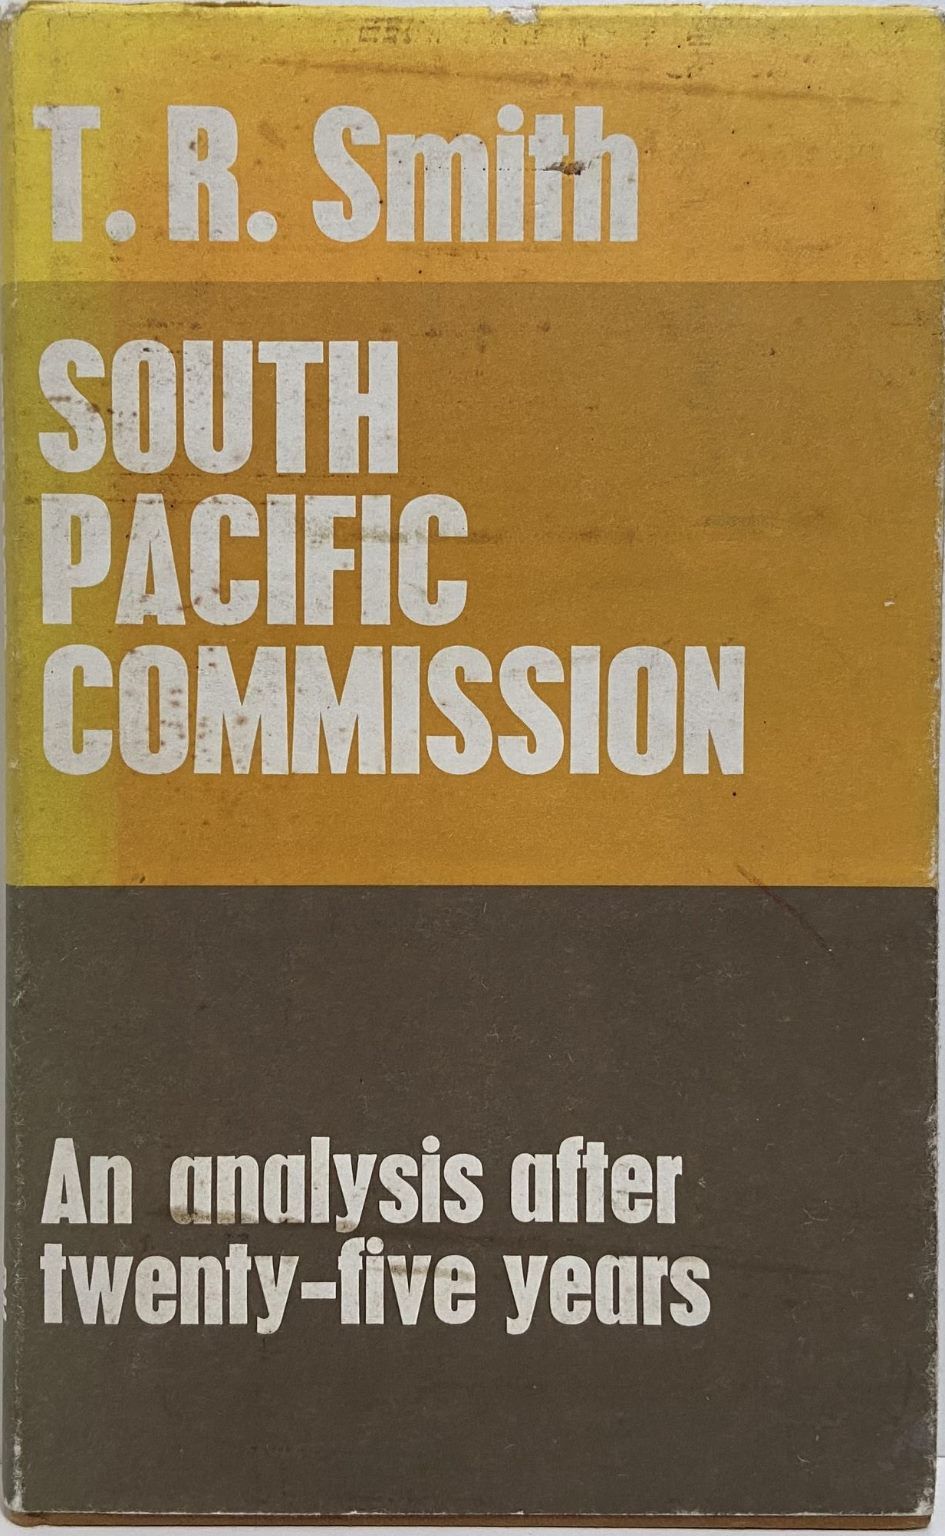 SOUTH PACIFIC COMMISSION: An analysis after twenty-five years